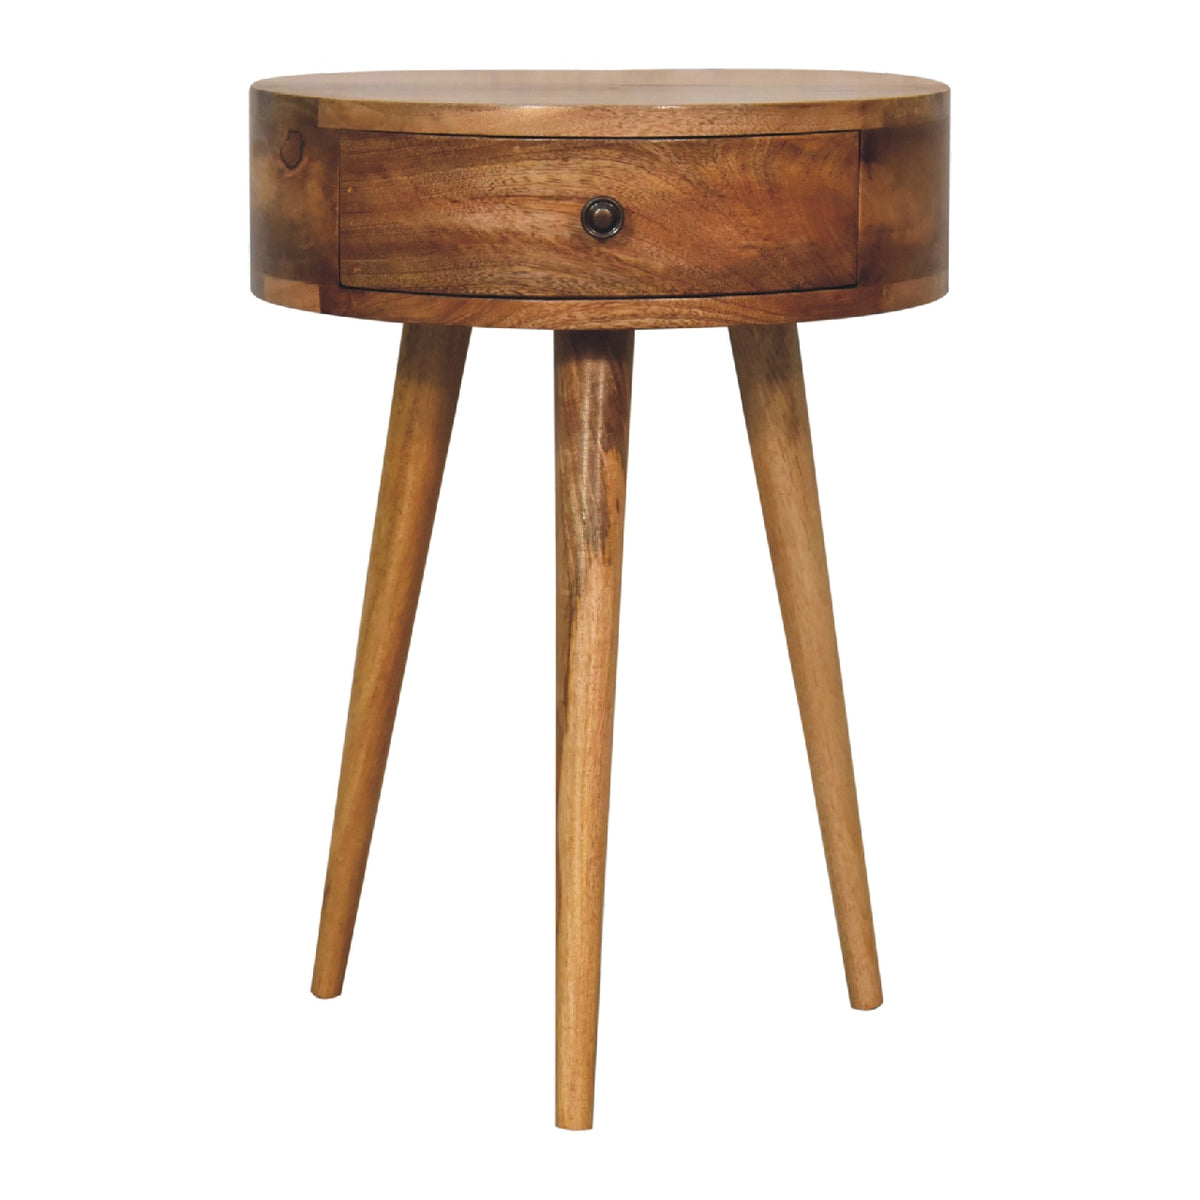 Small Round Bedside Table mini compact bedside table solid wood uk